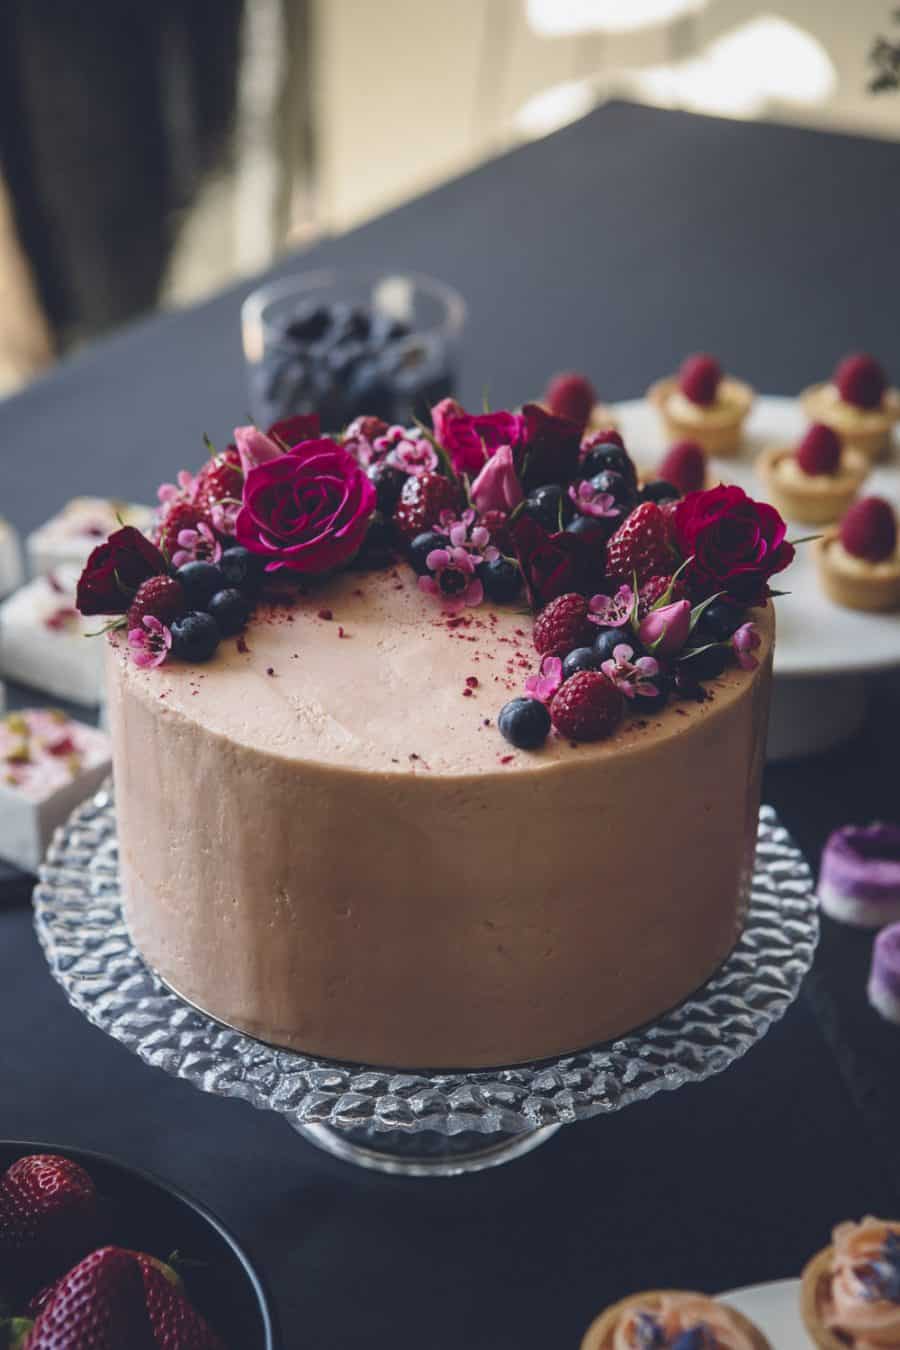 Best wedding cakes of 2016 - modern chocolate cake with fresh berries and edible flowers